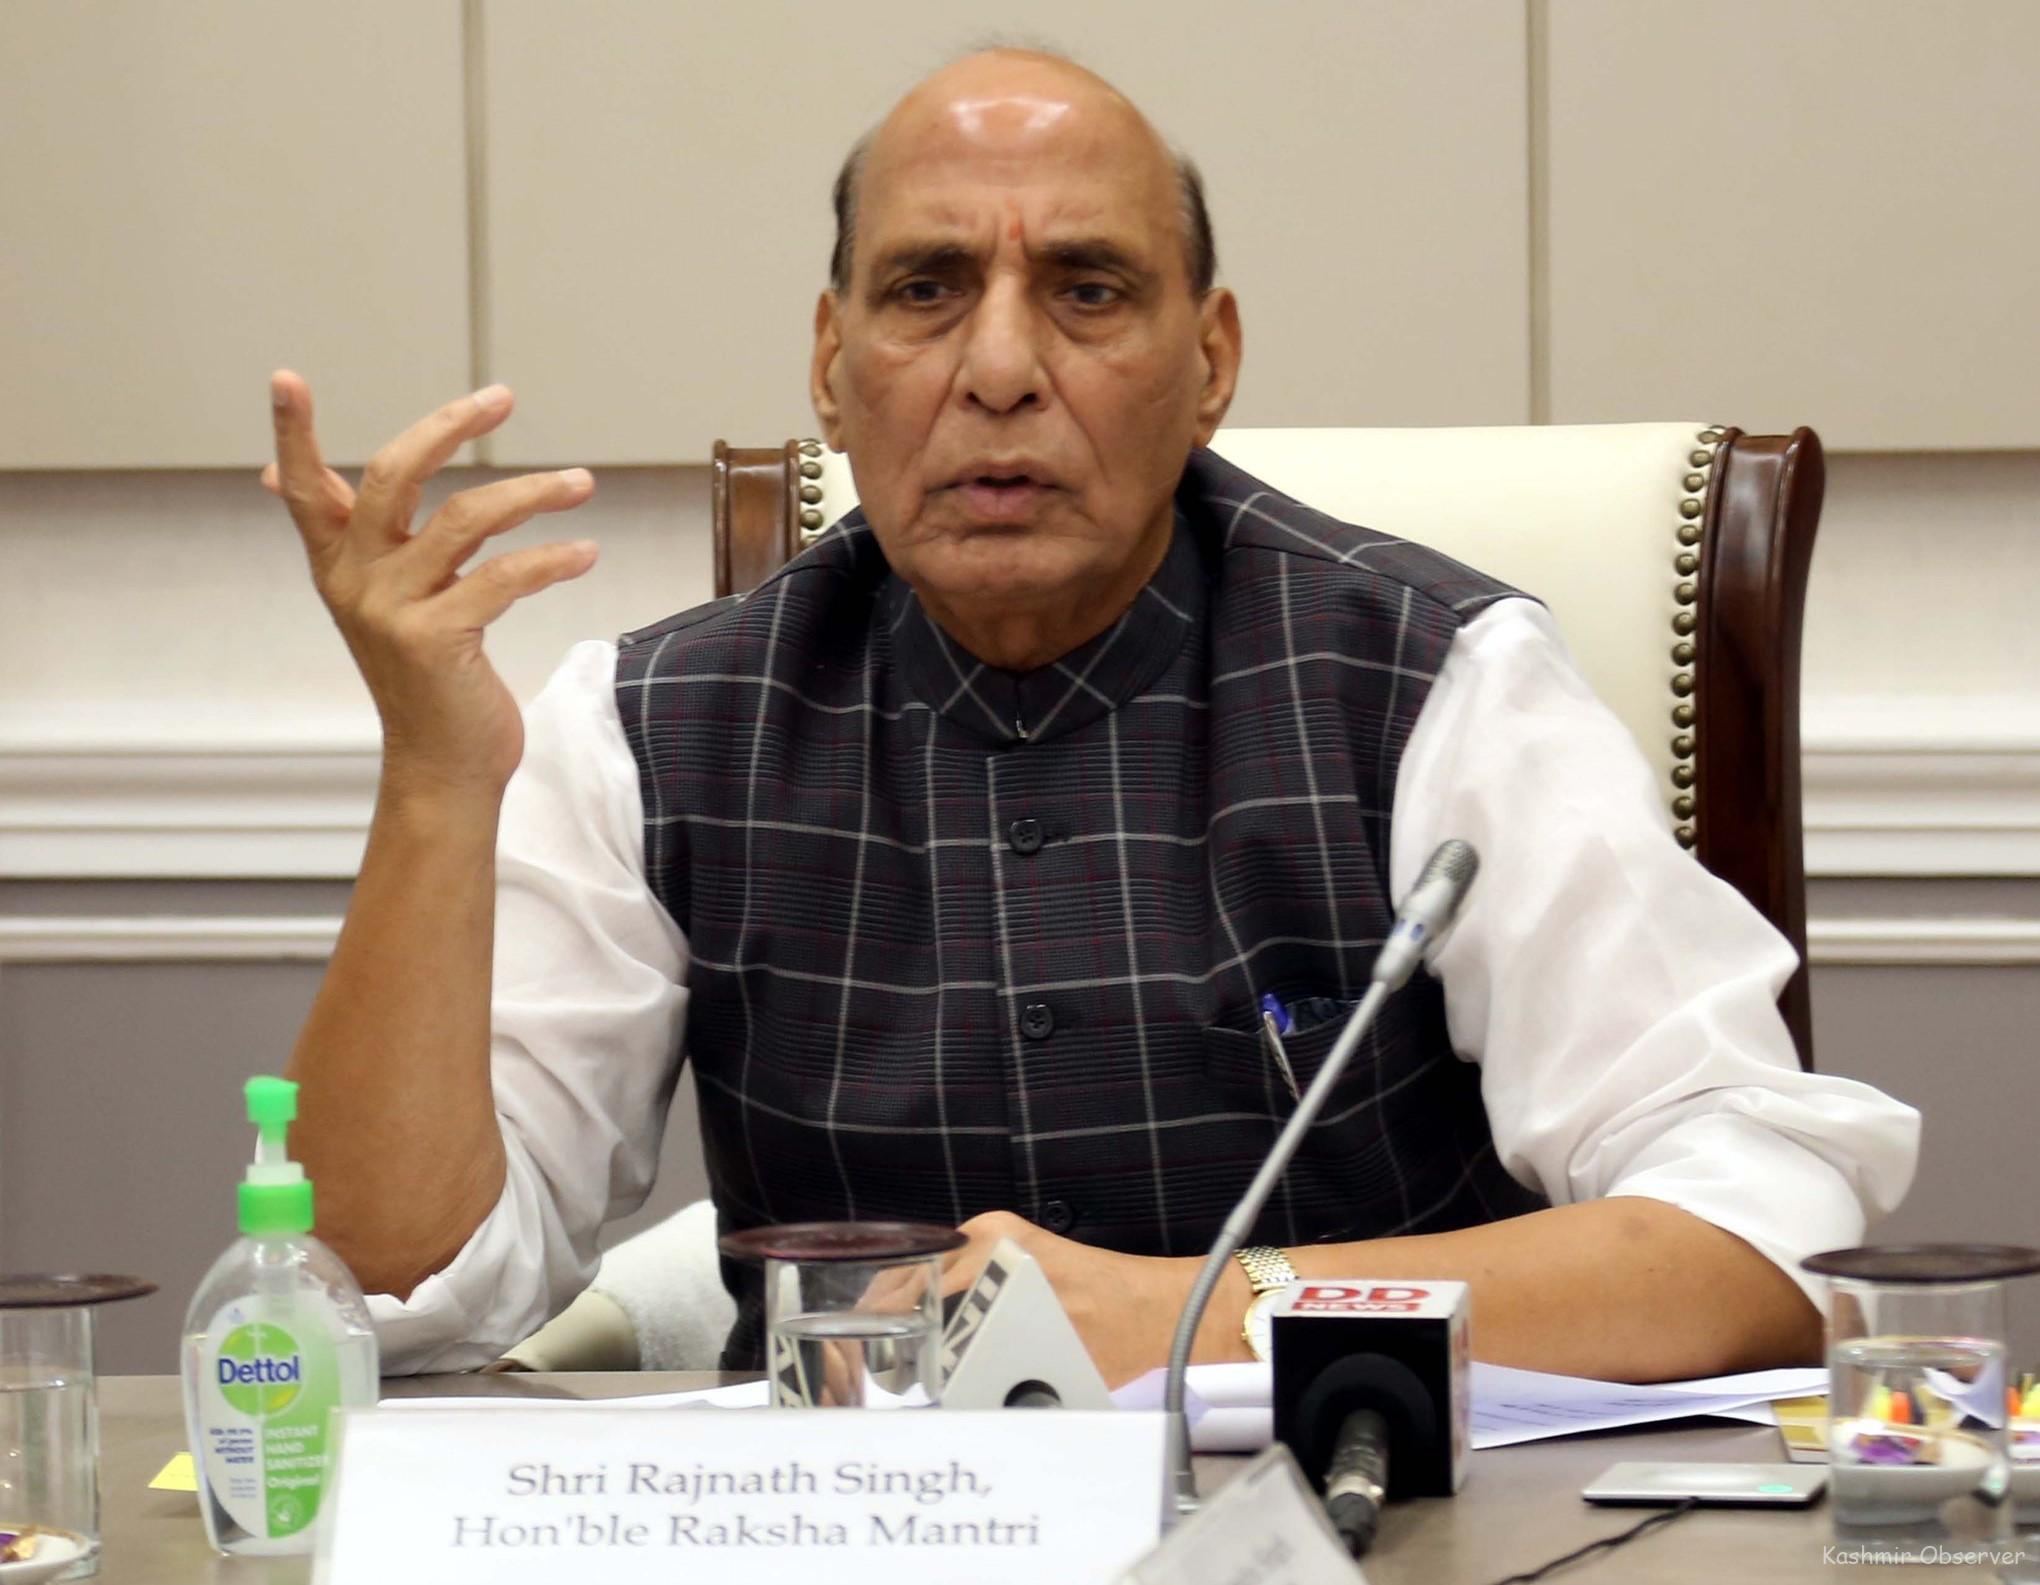 Ready To Discuss Issue With Full Courage: Rajnath On Issue Of Border Standoff With China